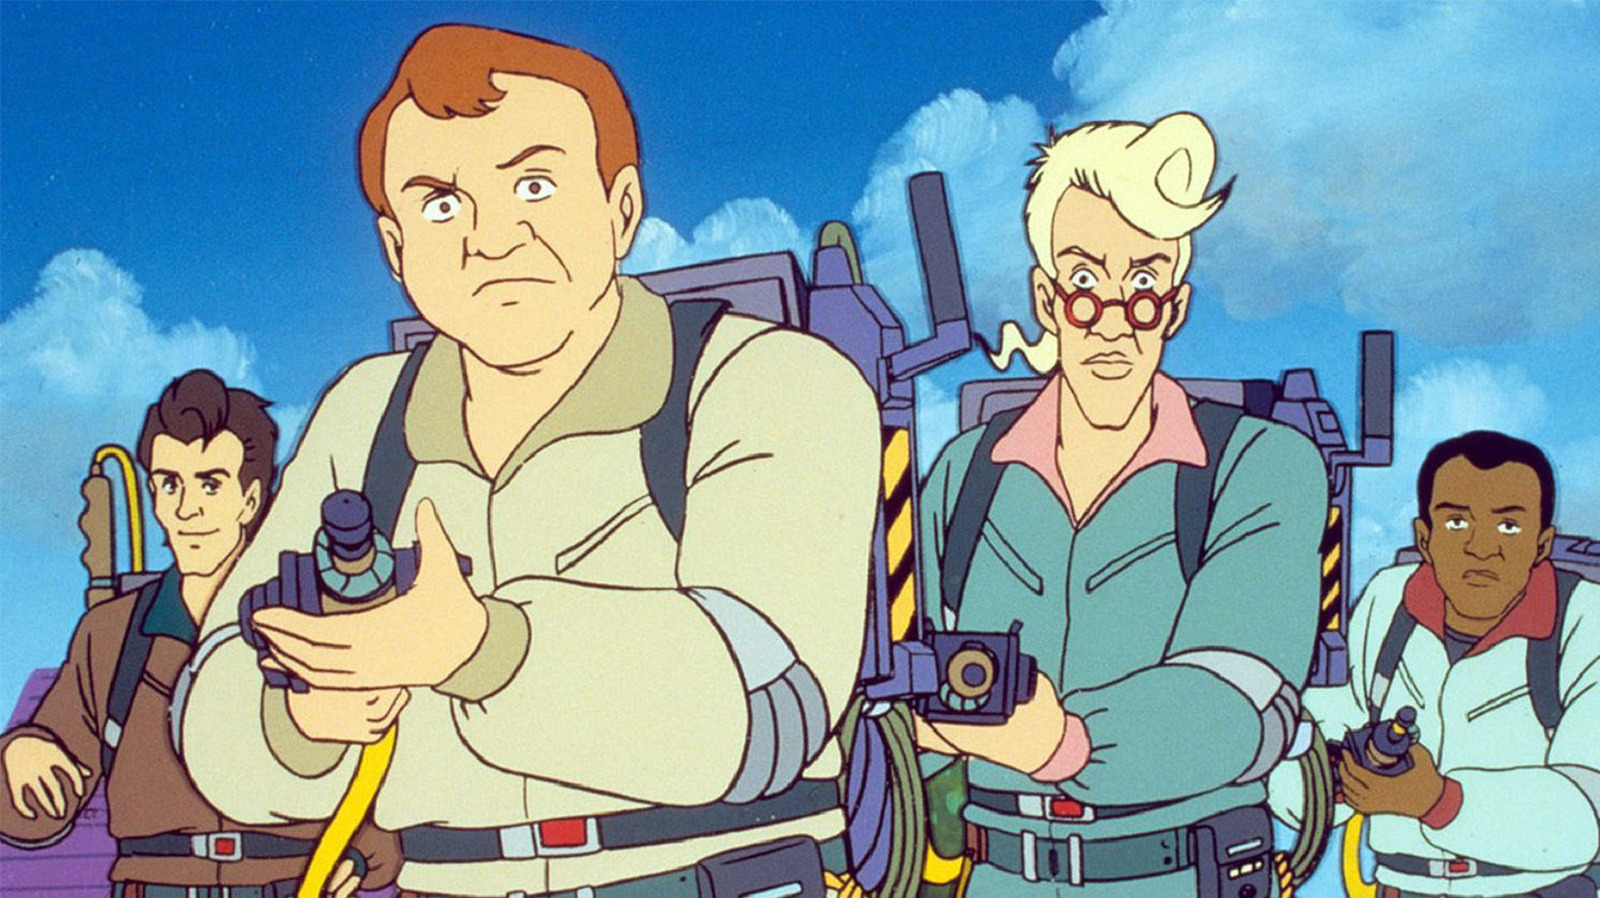 #New Ghostbusters Animated Series Coming To Netflix From Afterlife Team